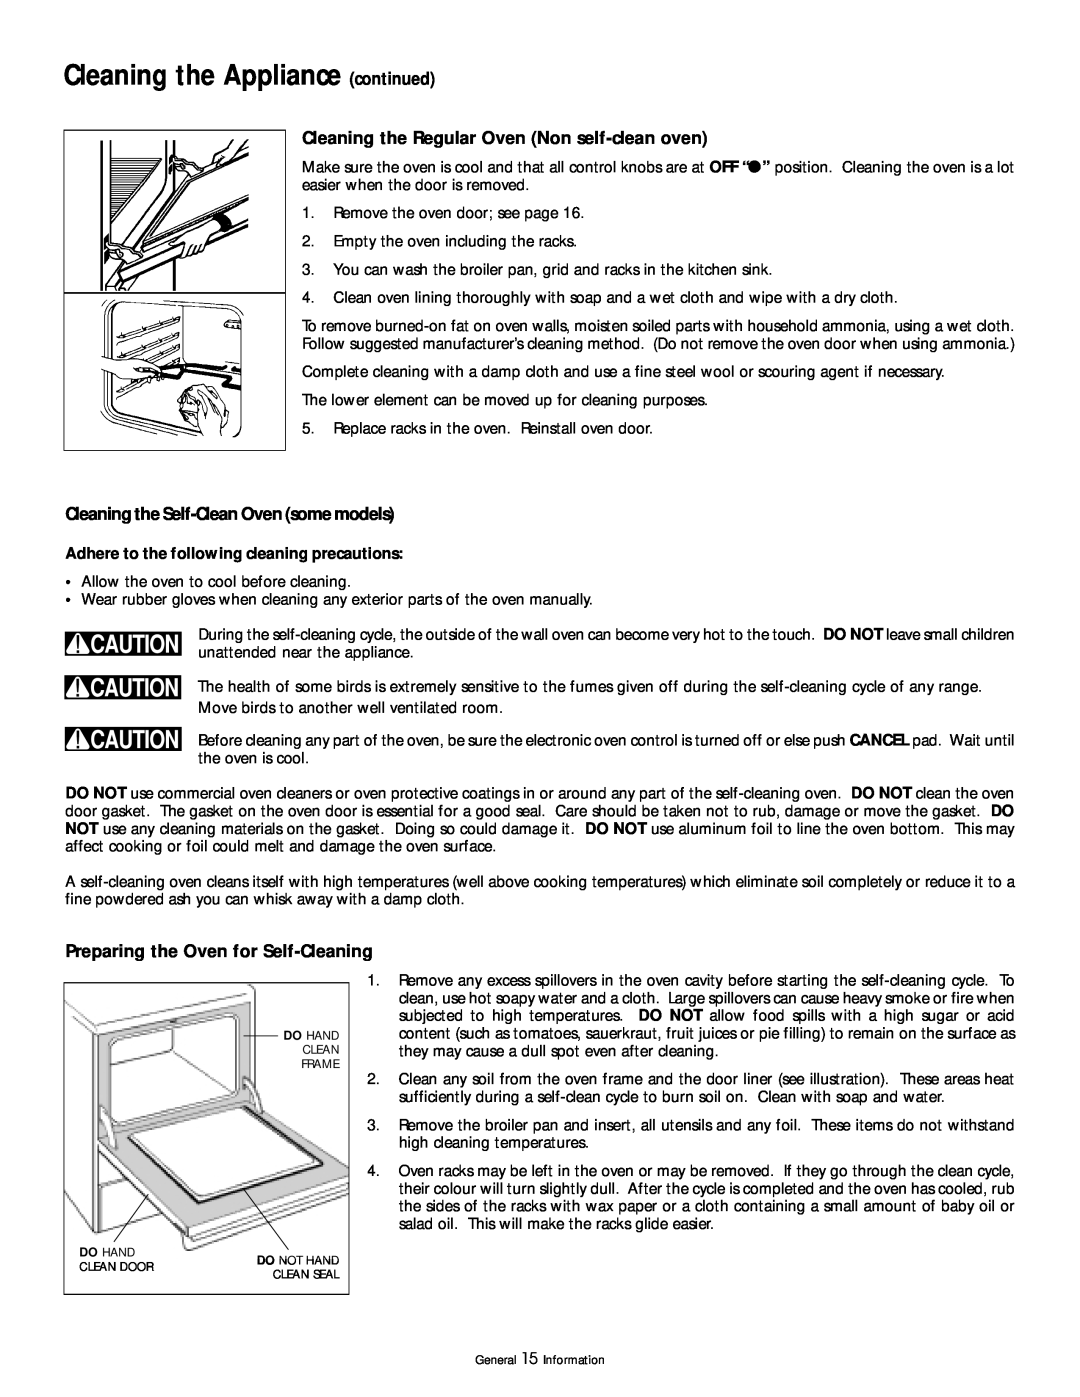 Frigidaire 318200404 manual Cleaning the Regular Oven Non self-clean oven, Cleaning the Self-Clean Oven some models 